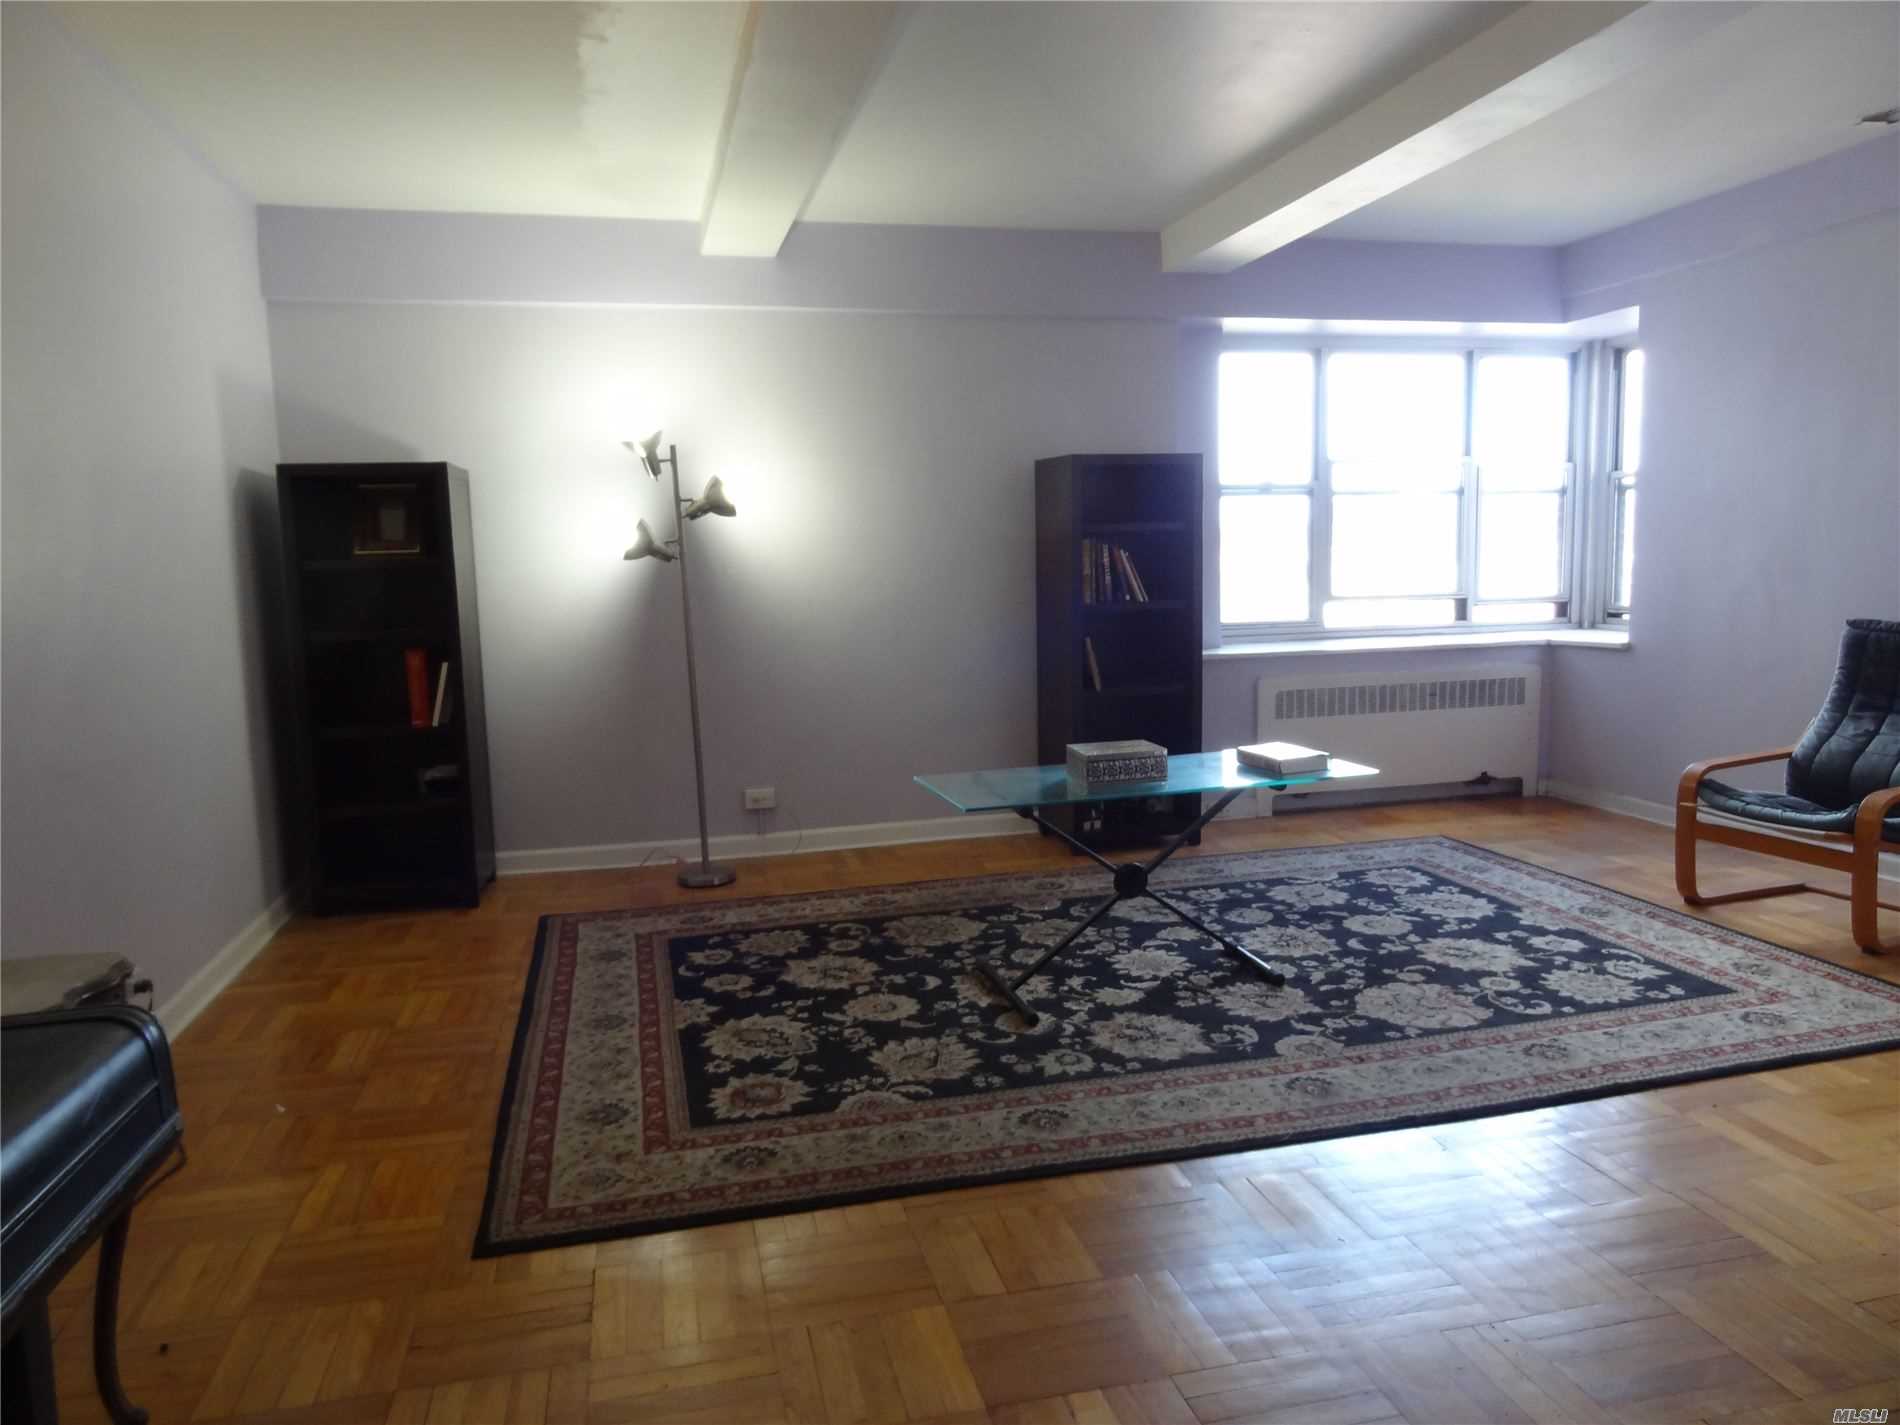 a living room with a rug